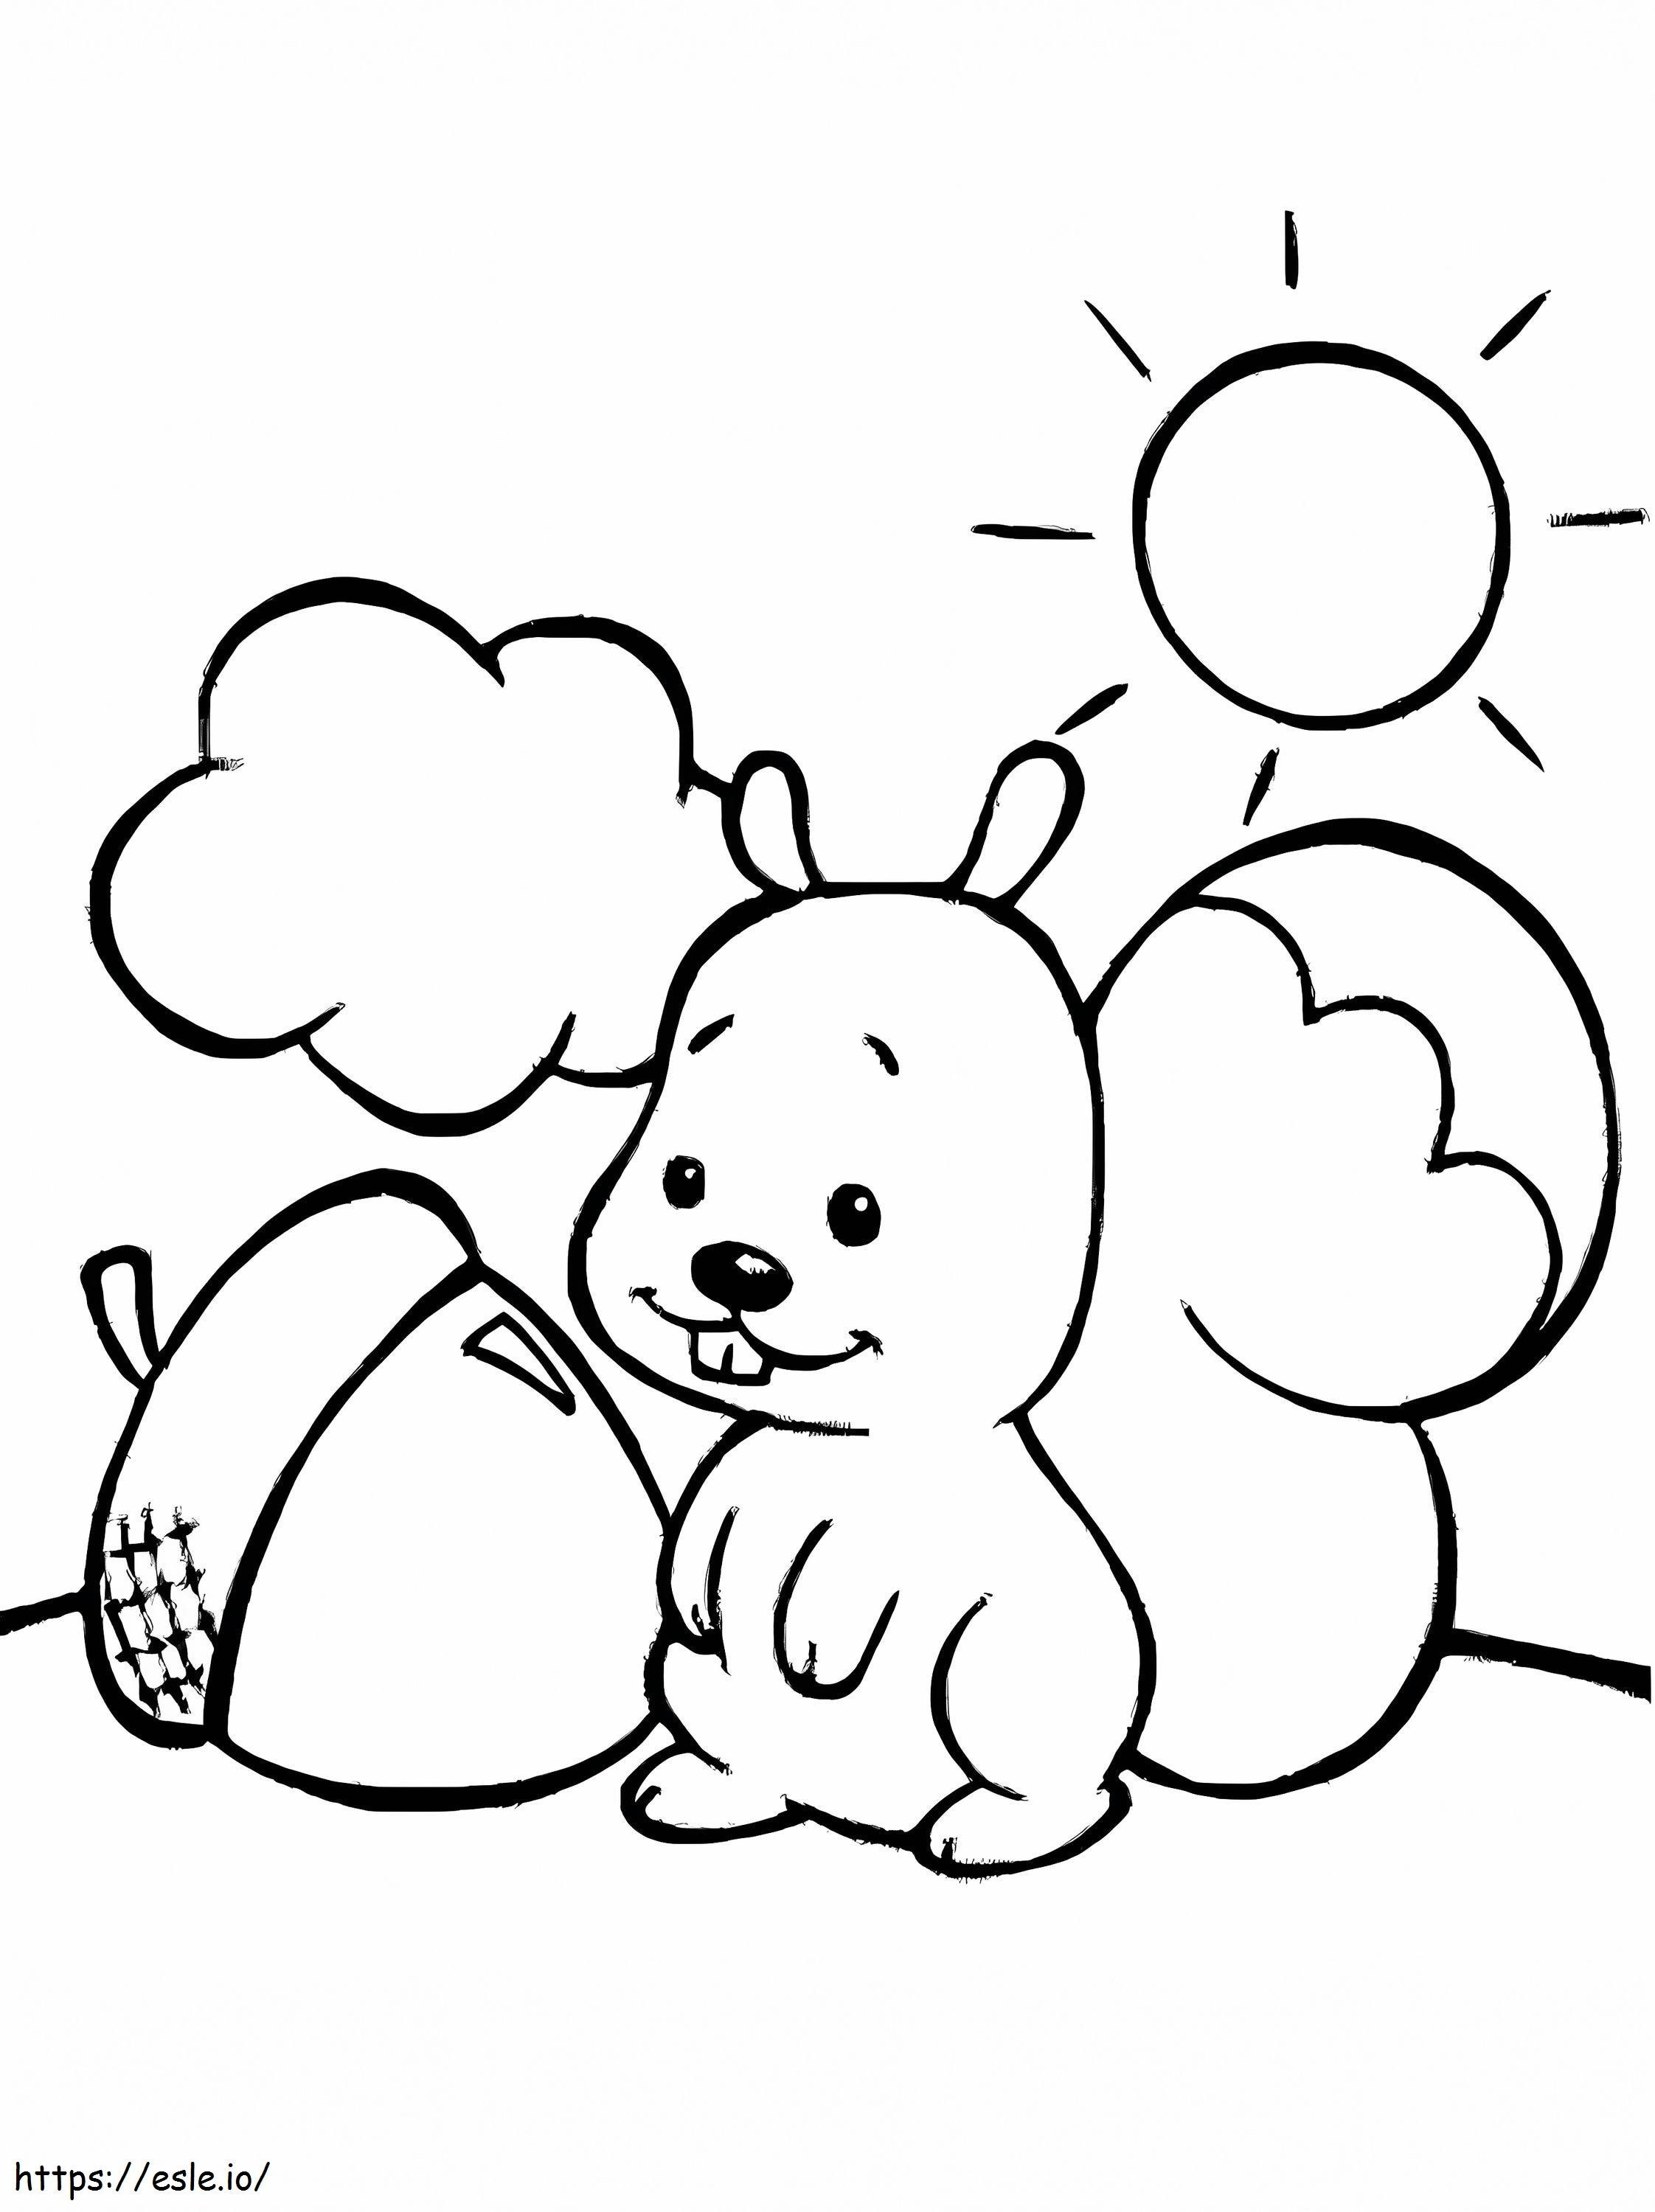 Squirrel And Acorn coloring page